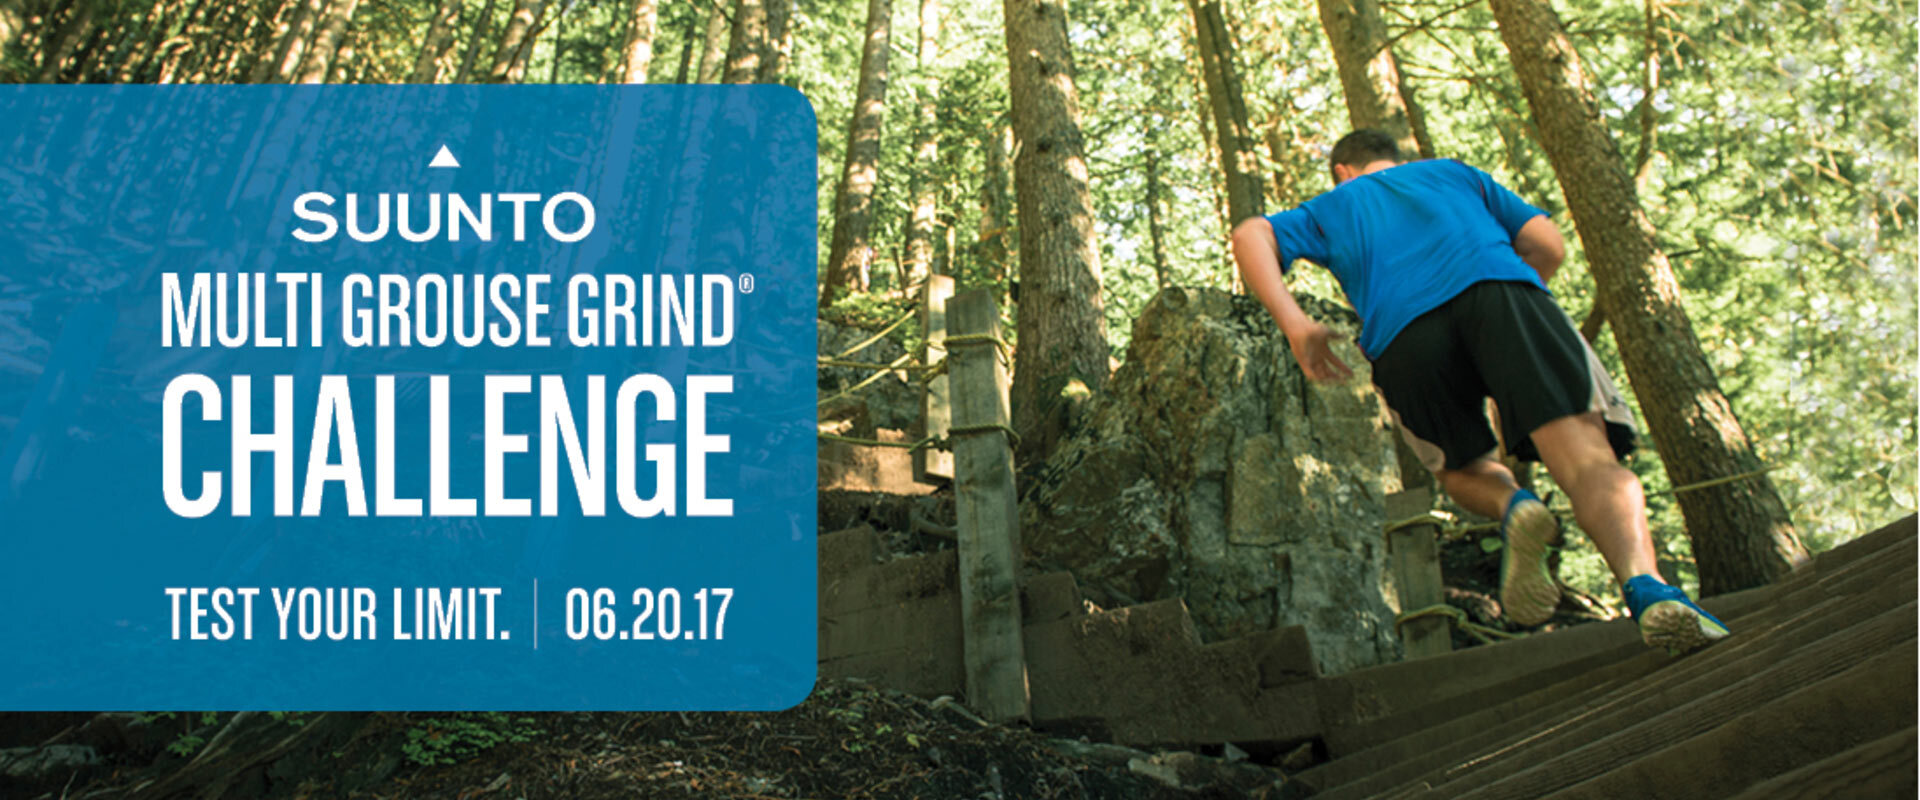 From sunrise to sundown, the Multi-Grouse Grind Challenge is back